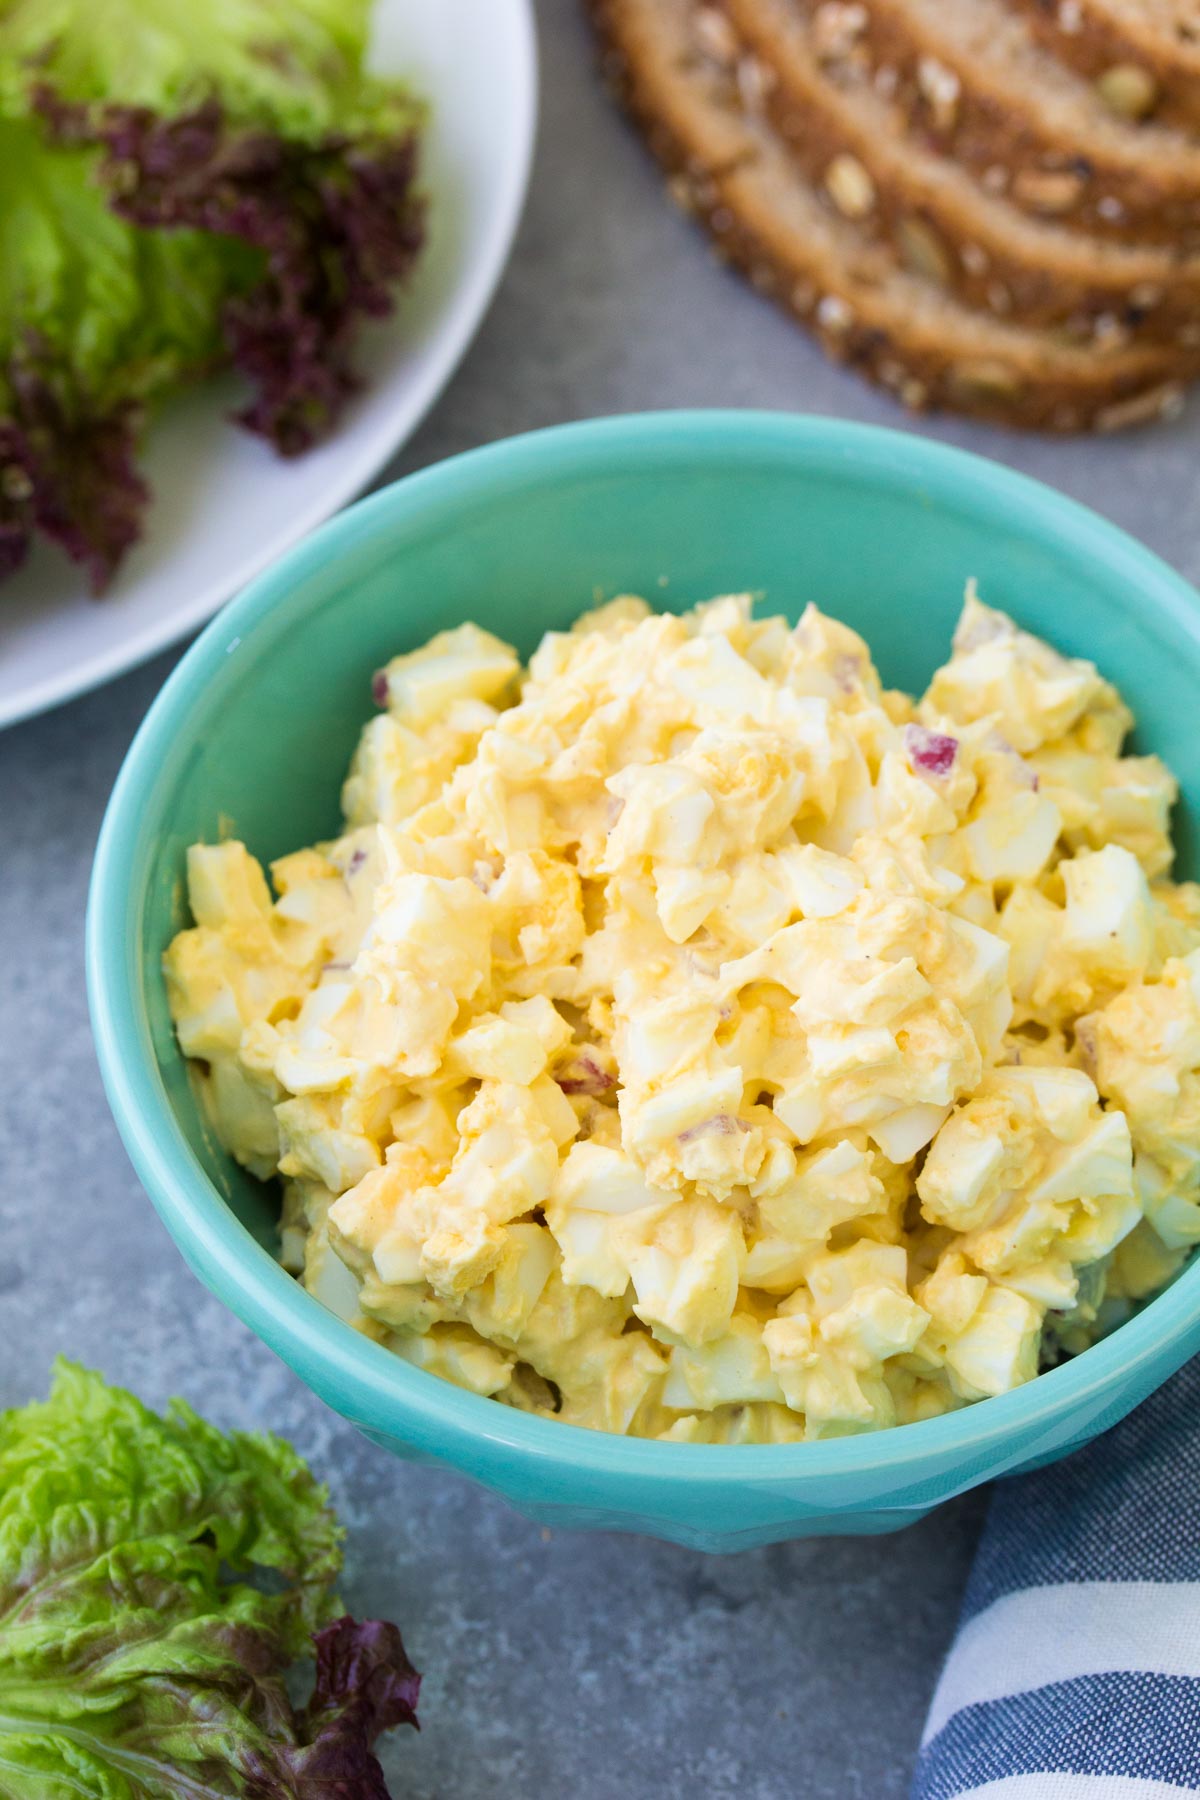 Easy Egg Salad Recipe Makes The Best Sandwiches